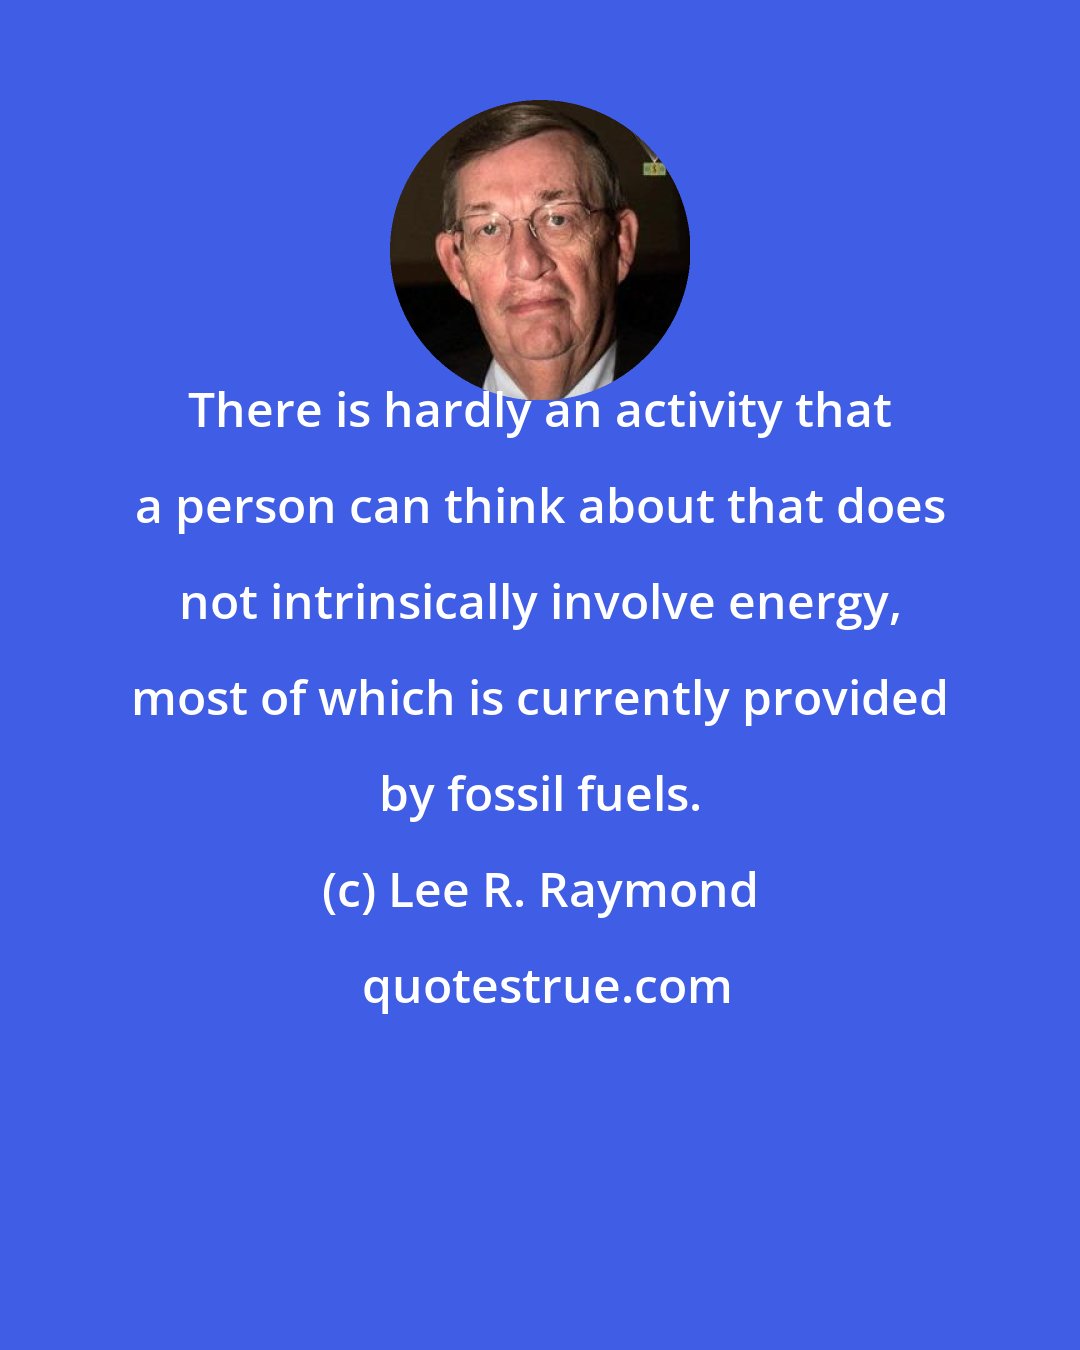 Lee R. Raymond: There is hardly an activity that a person can think about that does not intrinsically involve energy, most of which is currently provided by fossil fuels.